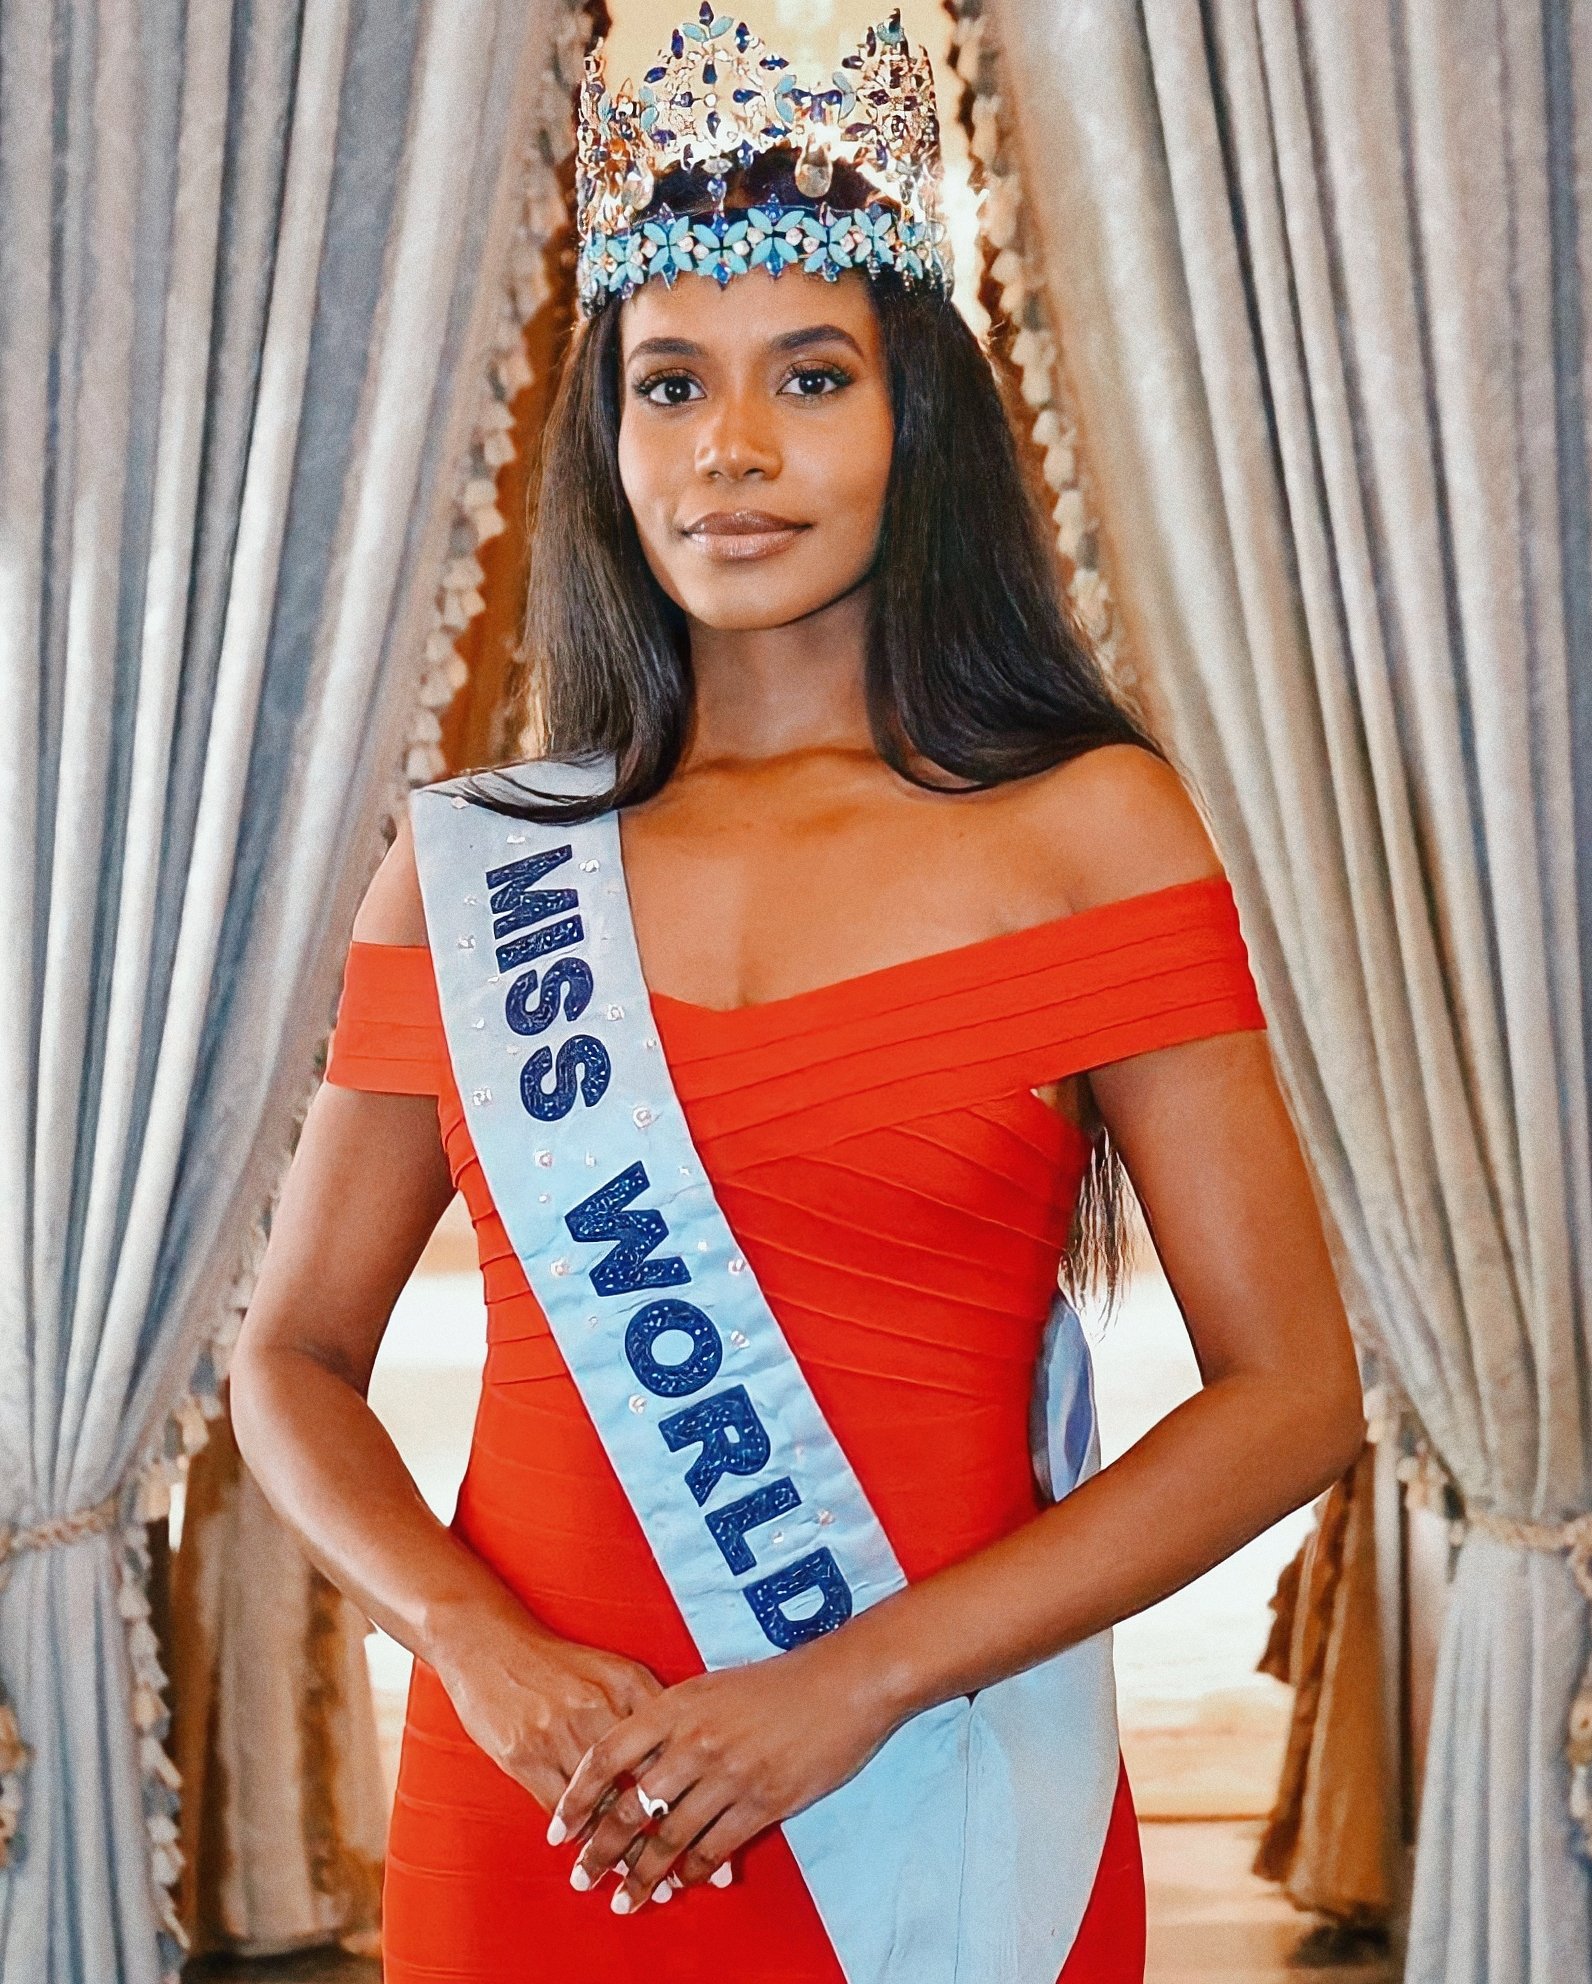 Official Thread of Miss World 2019 ® Toni-Ann Singh - JAMAICA - Page 4 E2m52DzVoAEHGZC?format=jpg&name=large